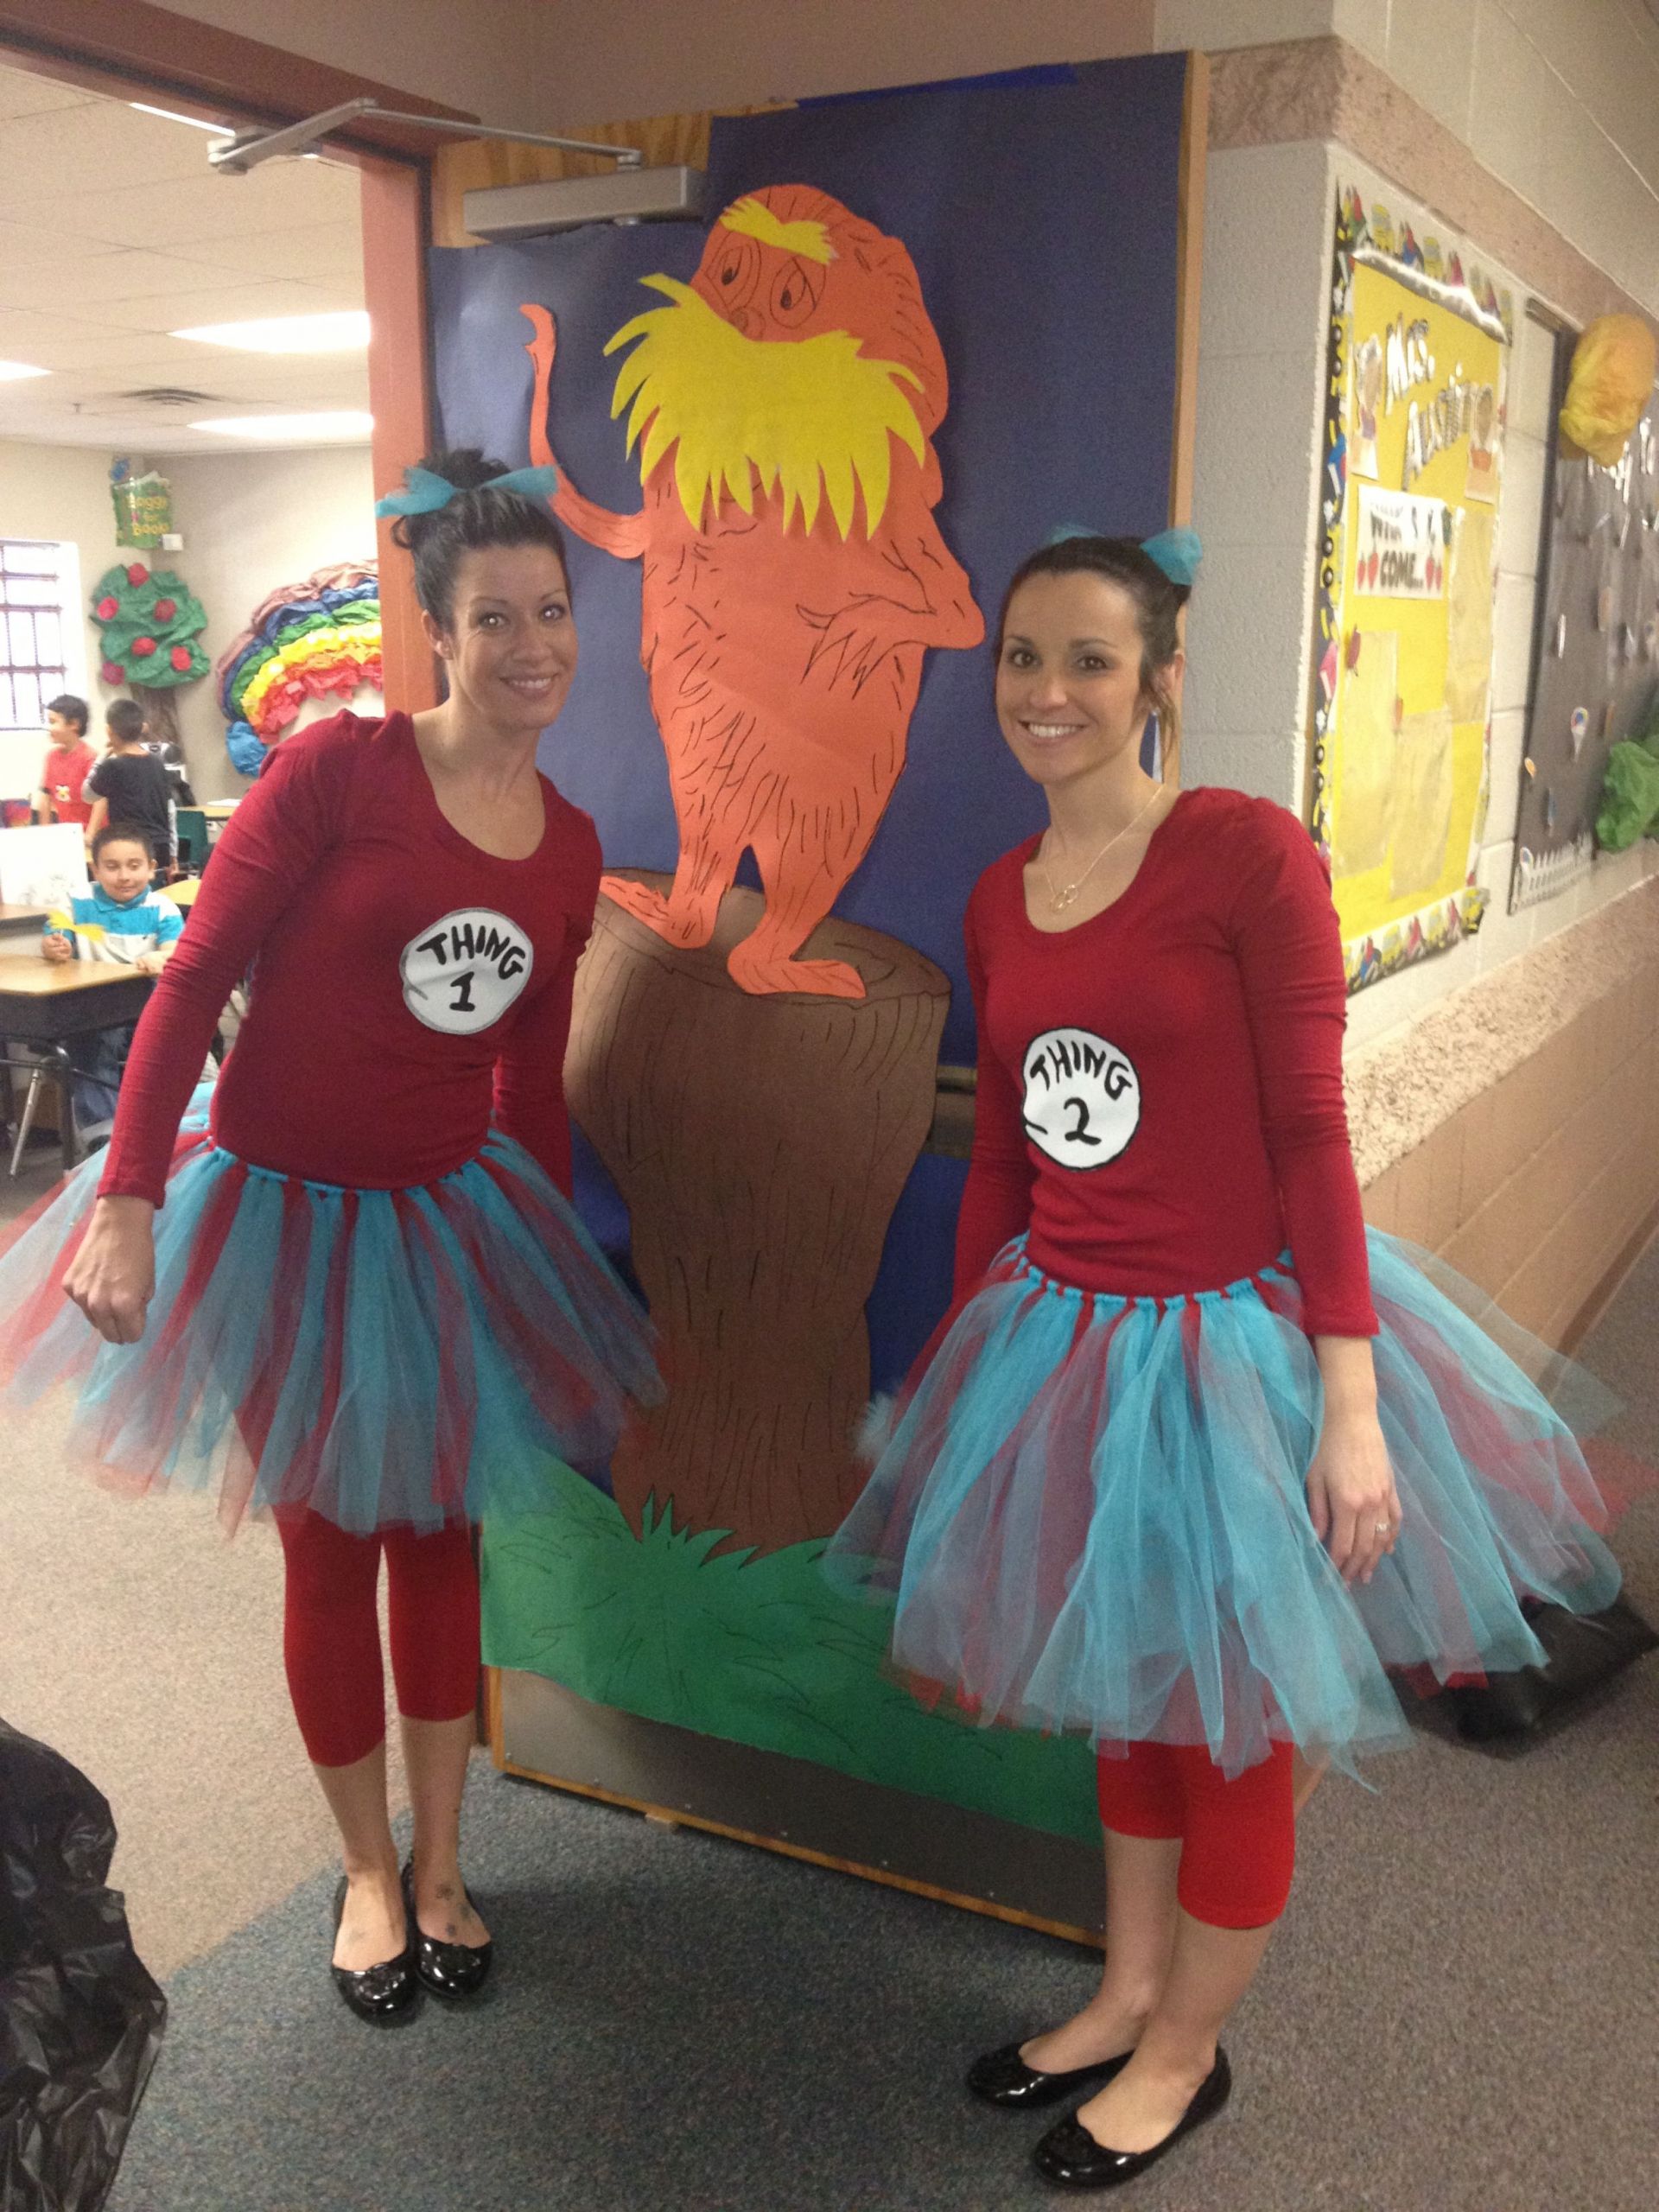 DIY Thing 1 And Thing 2 Costumes
 Thing 1 and Thing 2